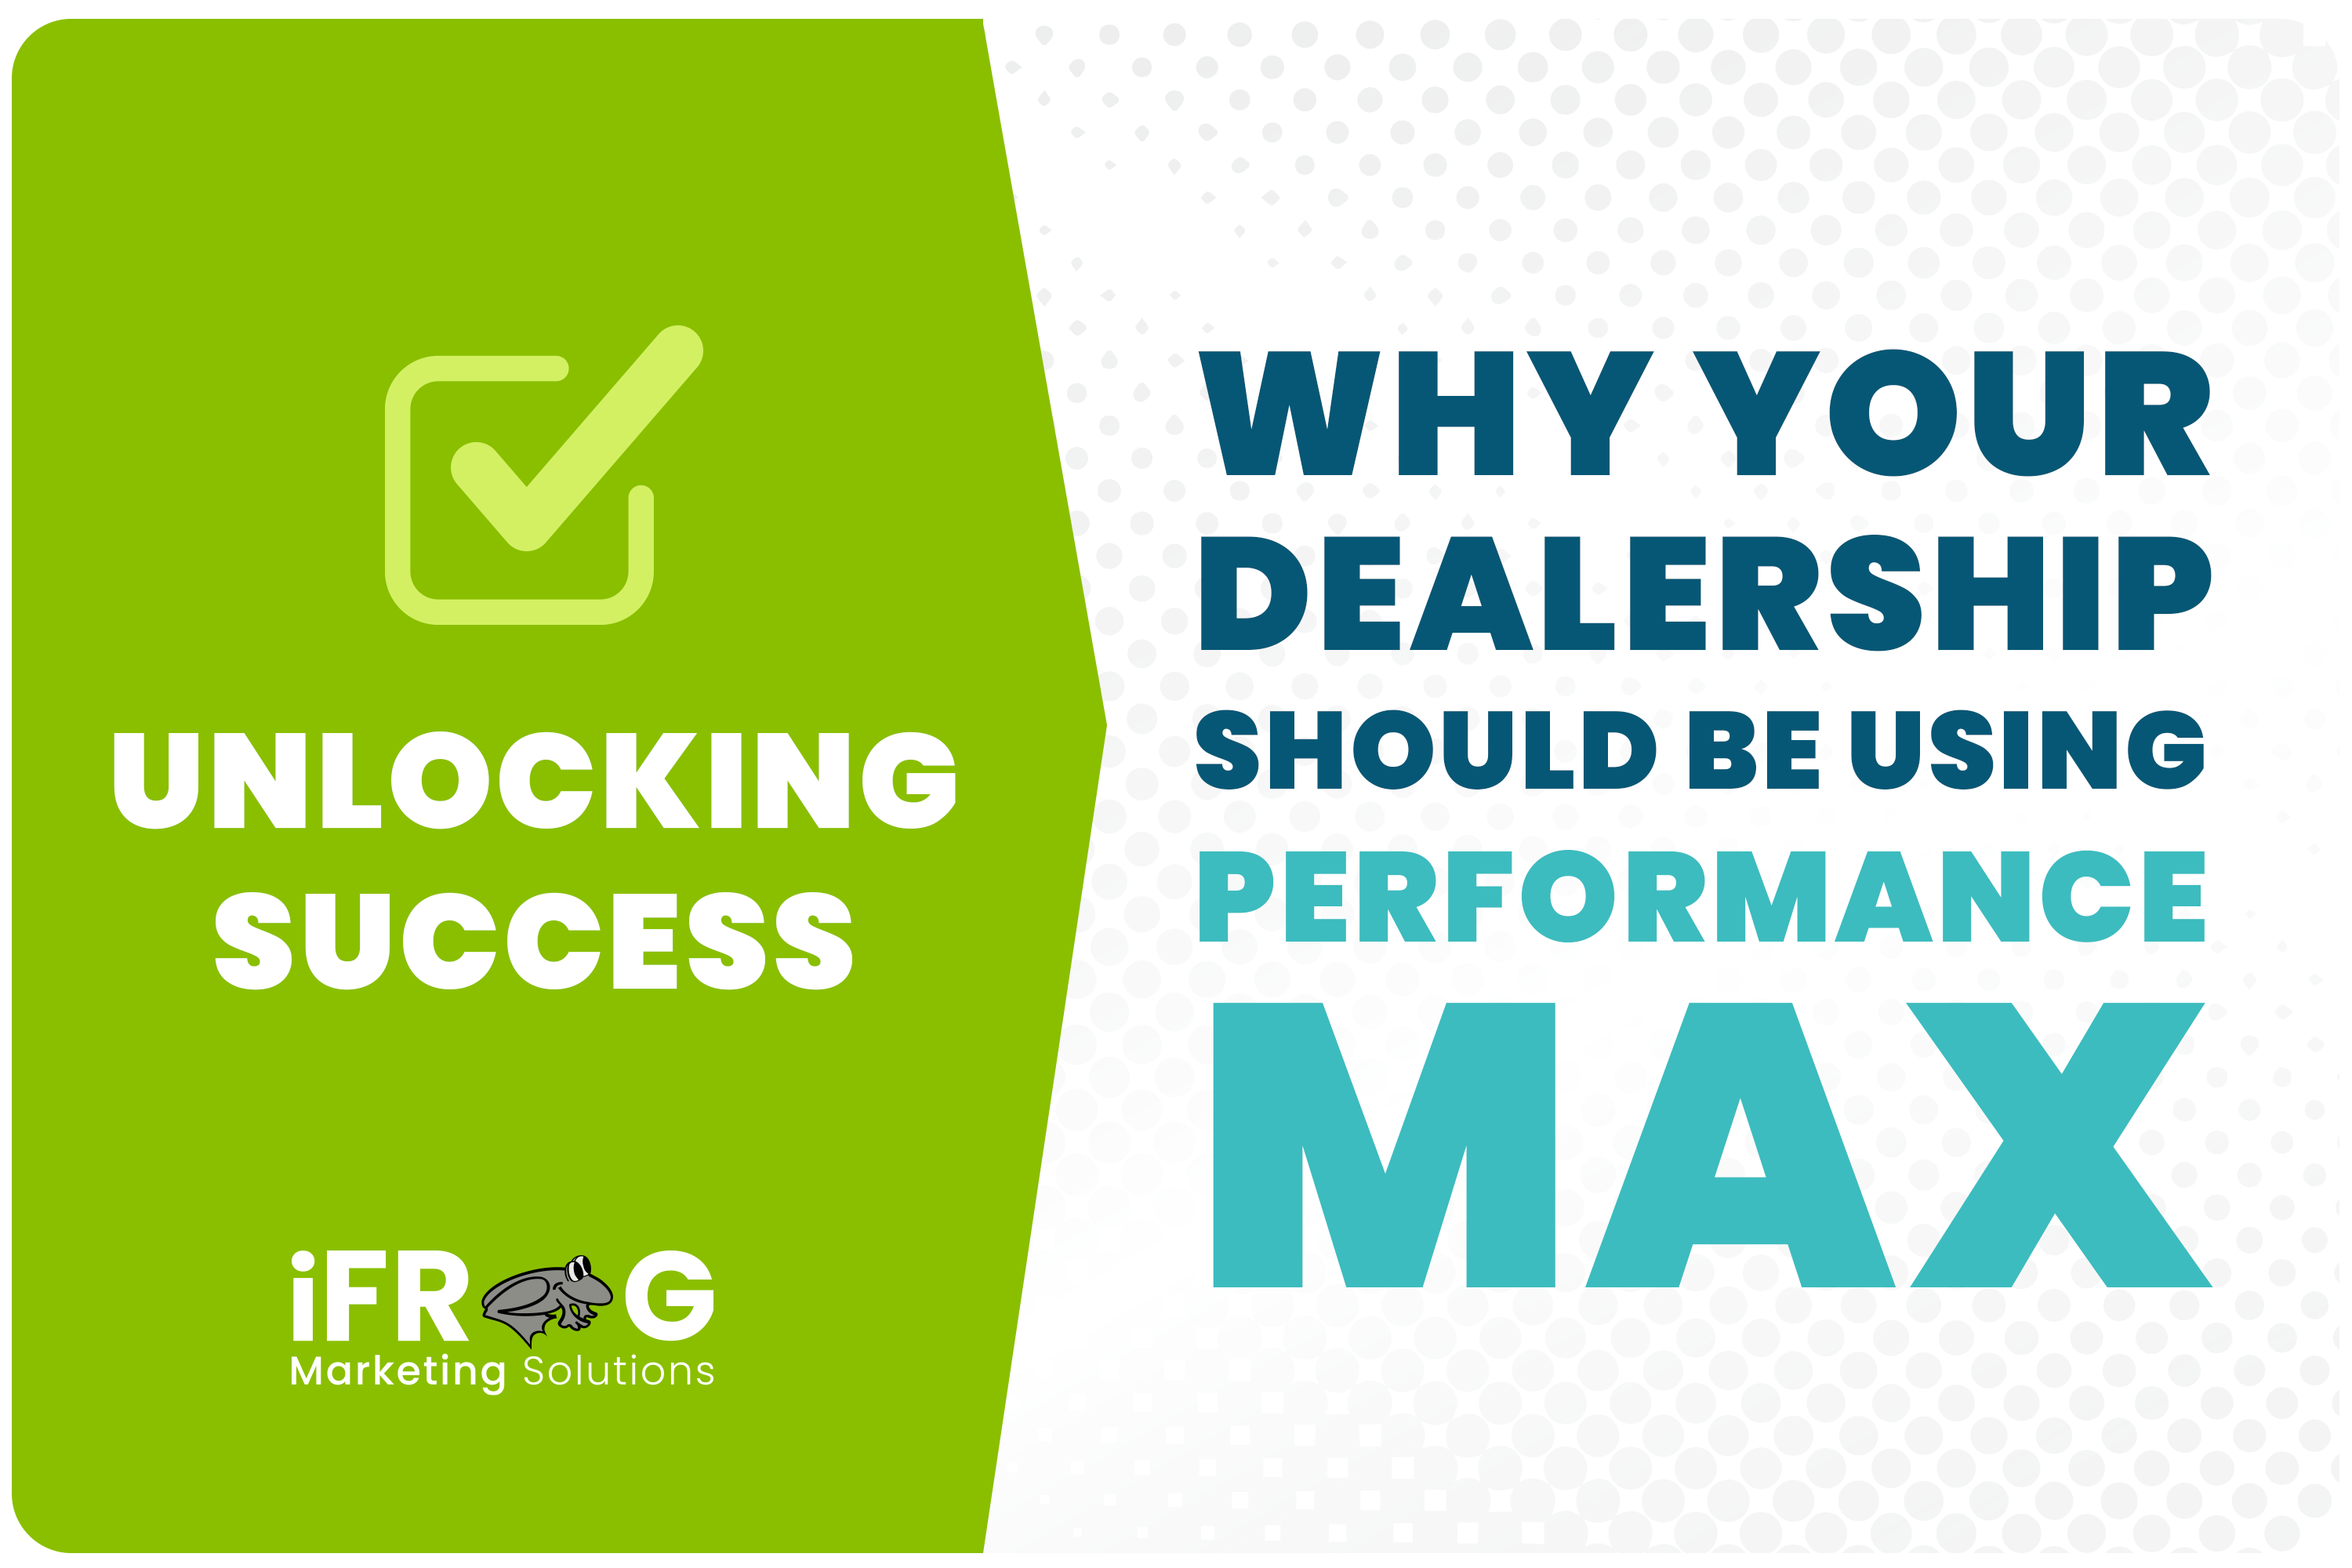 Why Your Dealership Should Be Using Performance Max